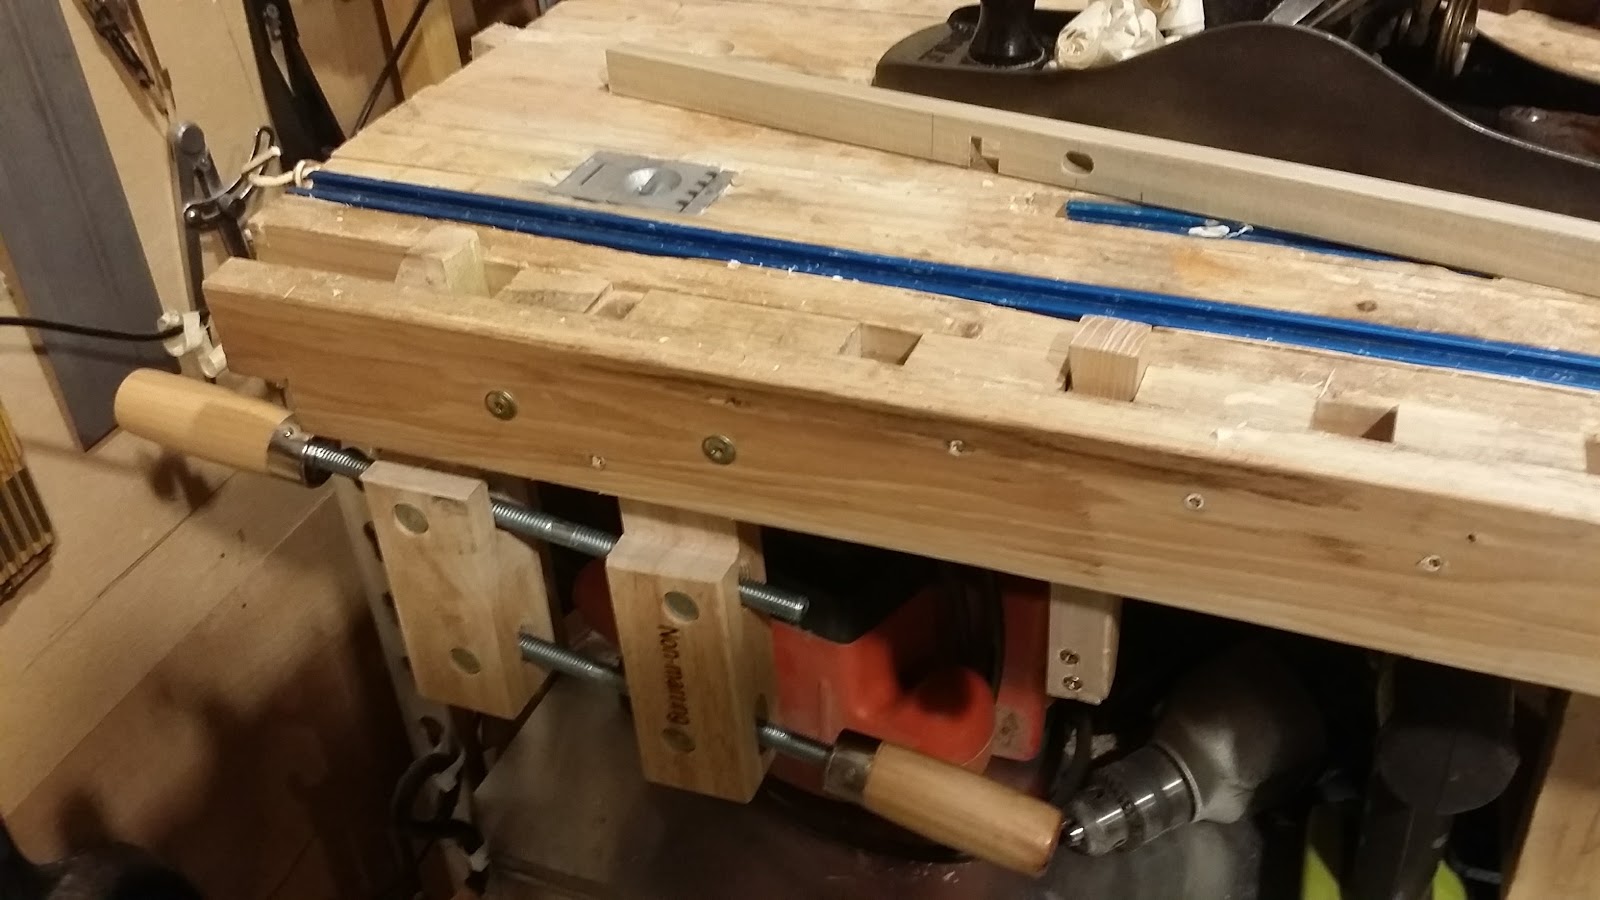 Easy Add-On Tail Vise for the Tiny Shop